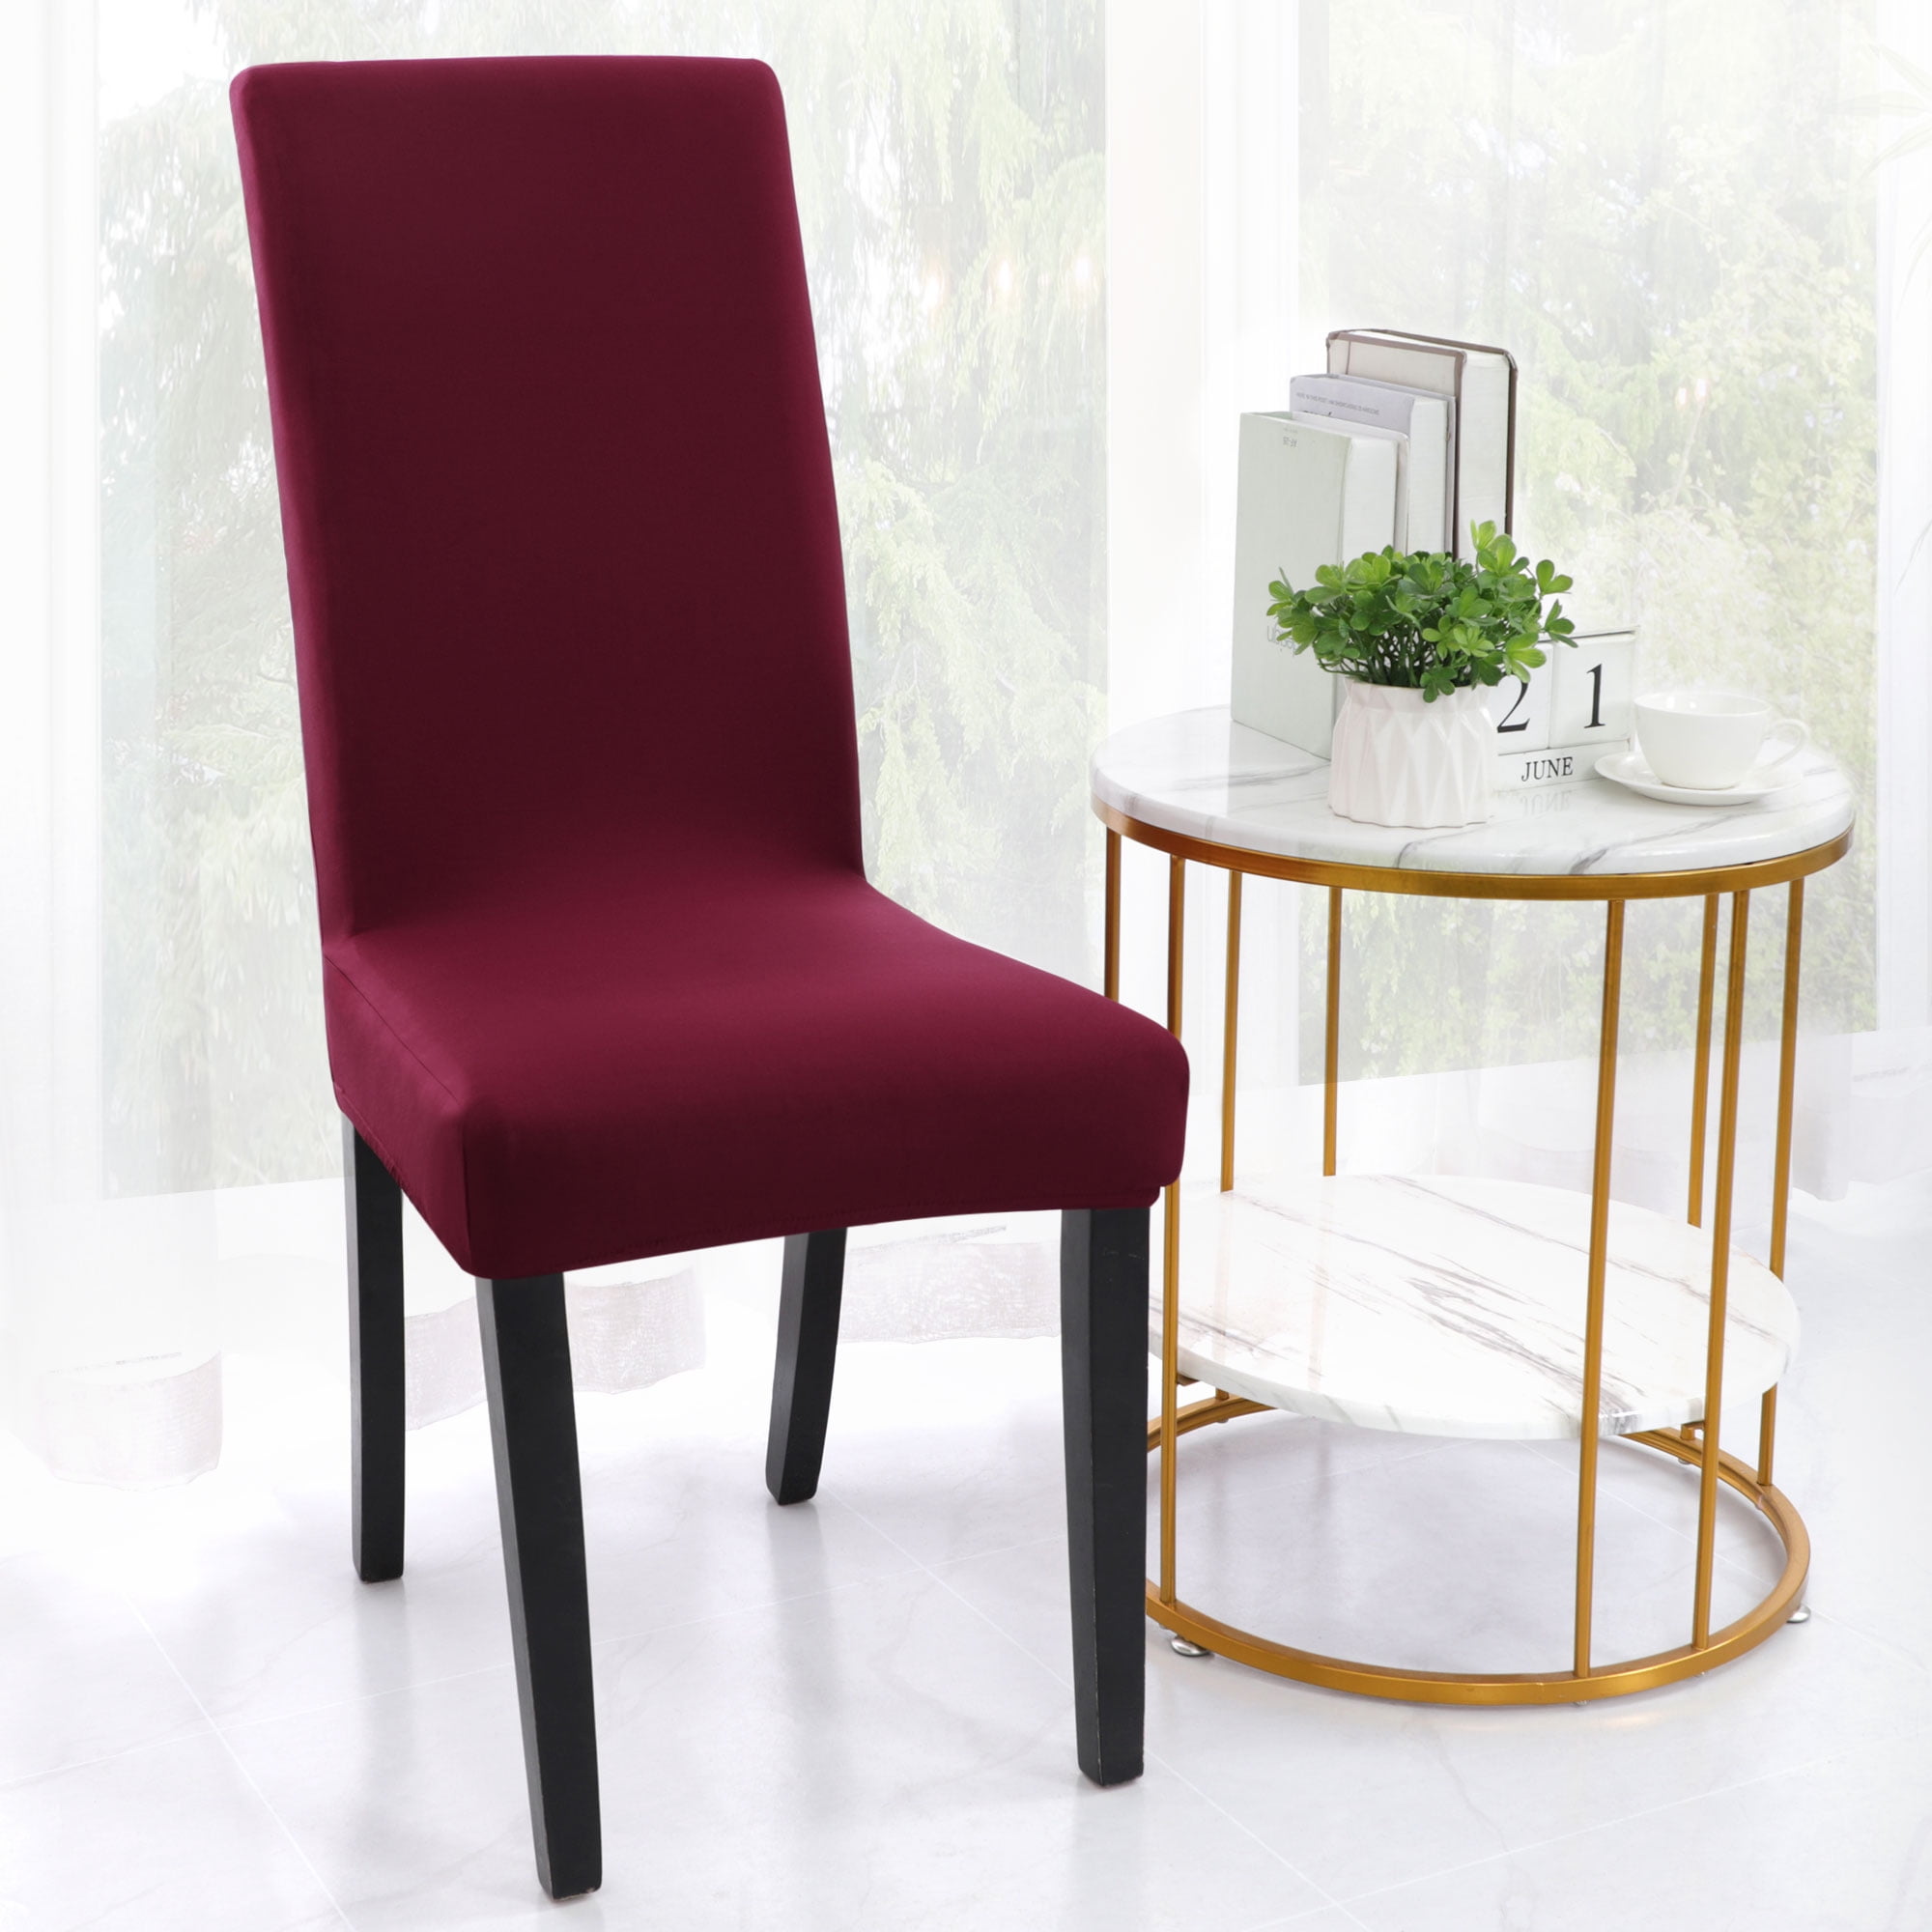 Details about   Waterproof PU Leather Stretch Dining Room Chair Cover Wedding Banquet Seat Cover 